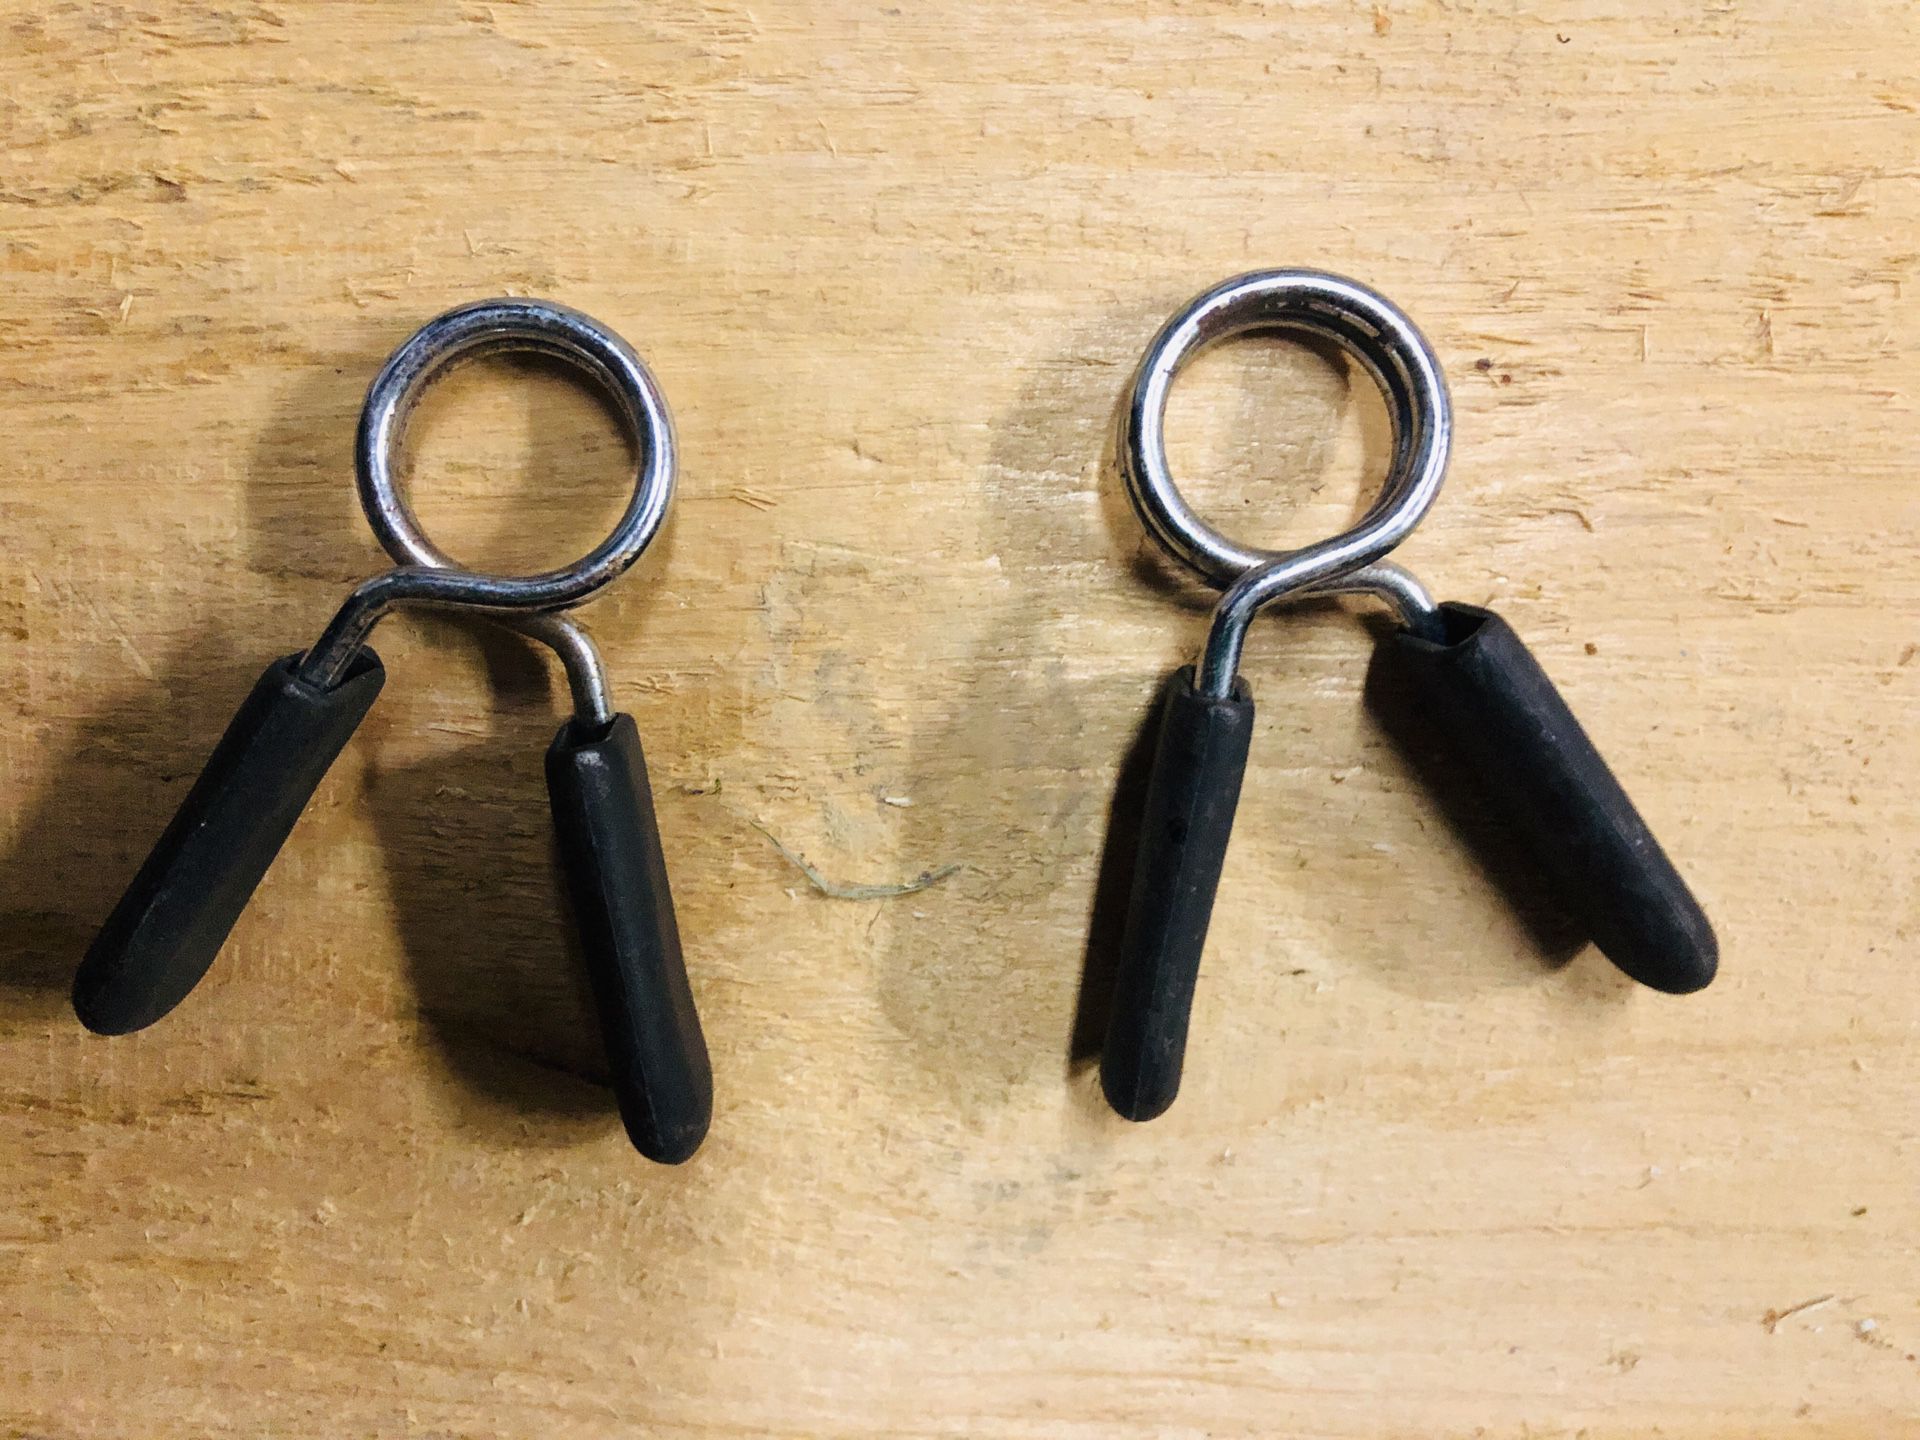 clums / clip for 1” standard barbell or dumbell